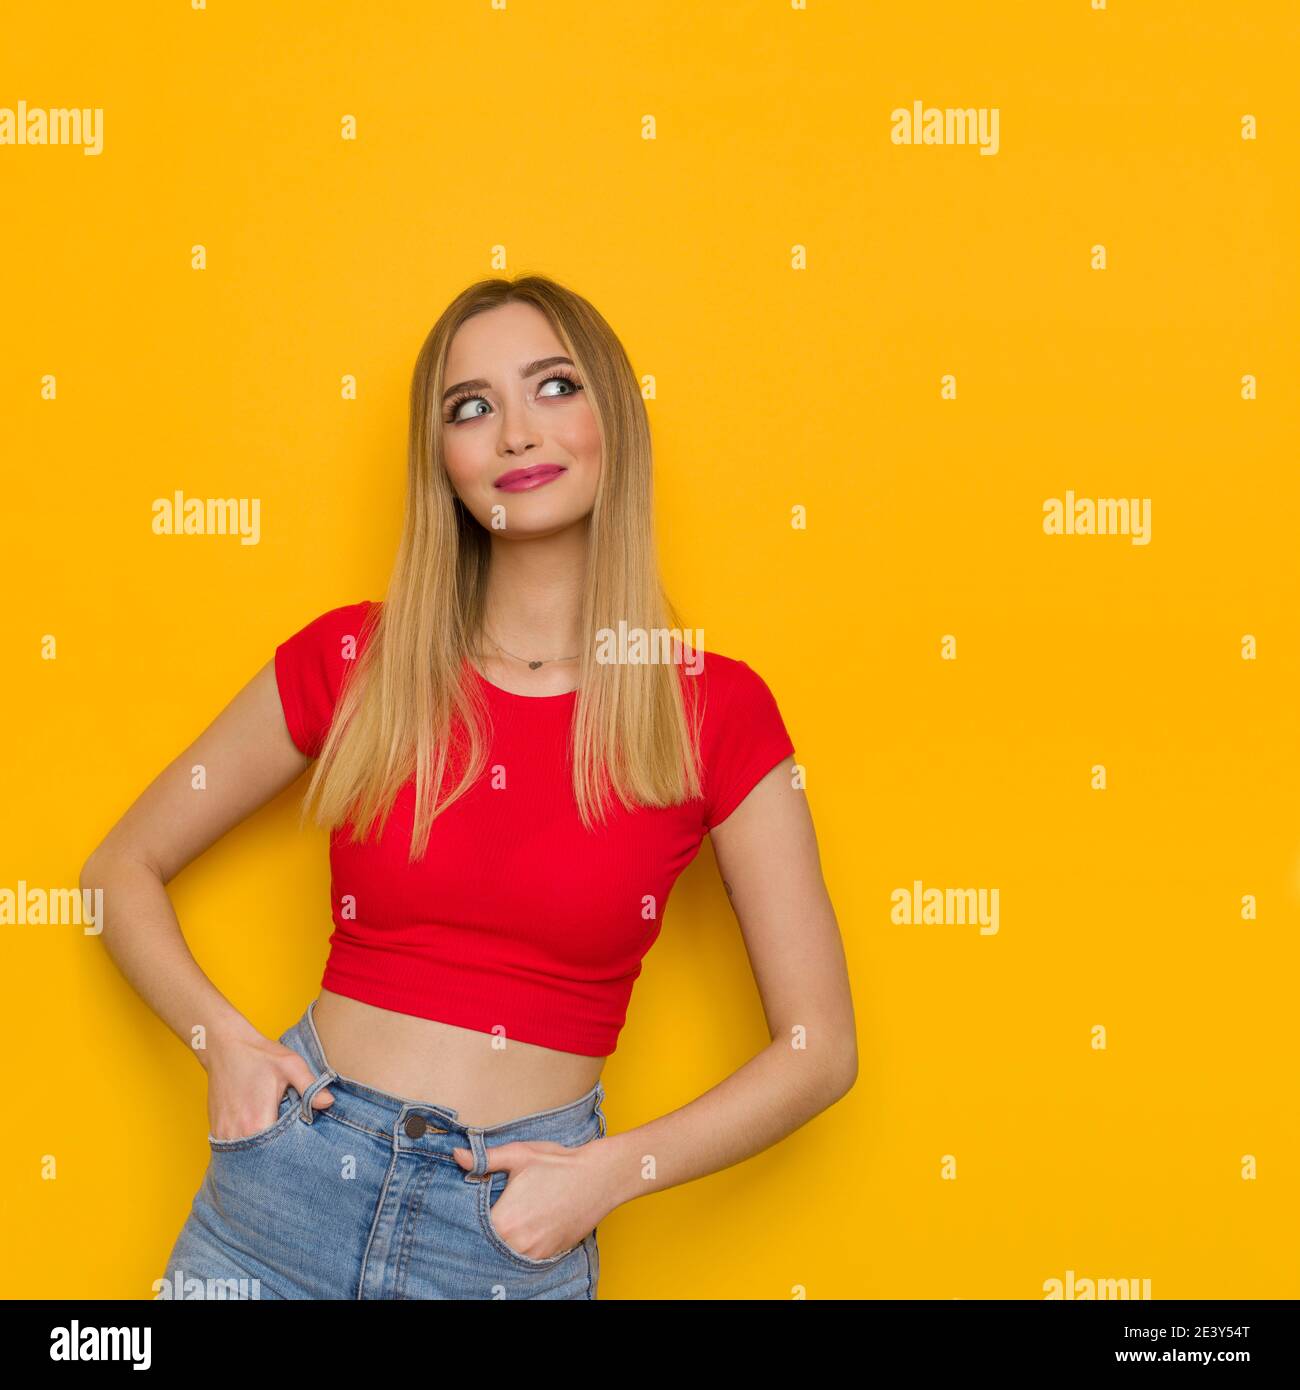 Smiling young woman in red top is holding hands in pockets and looking at the side. Front view. Waist up studio shot on yellow background. Stock Photo